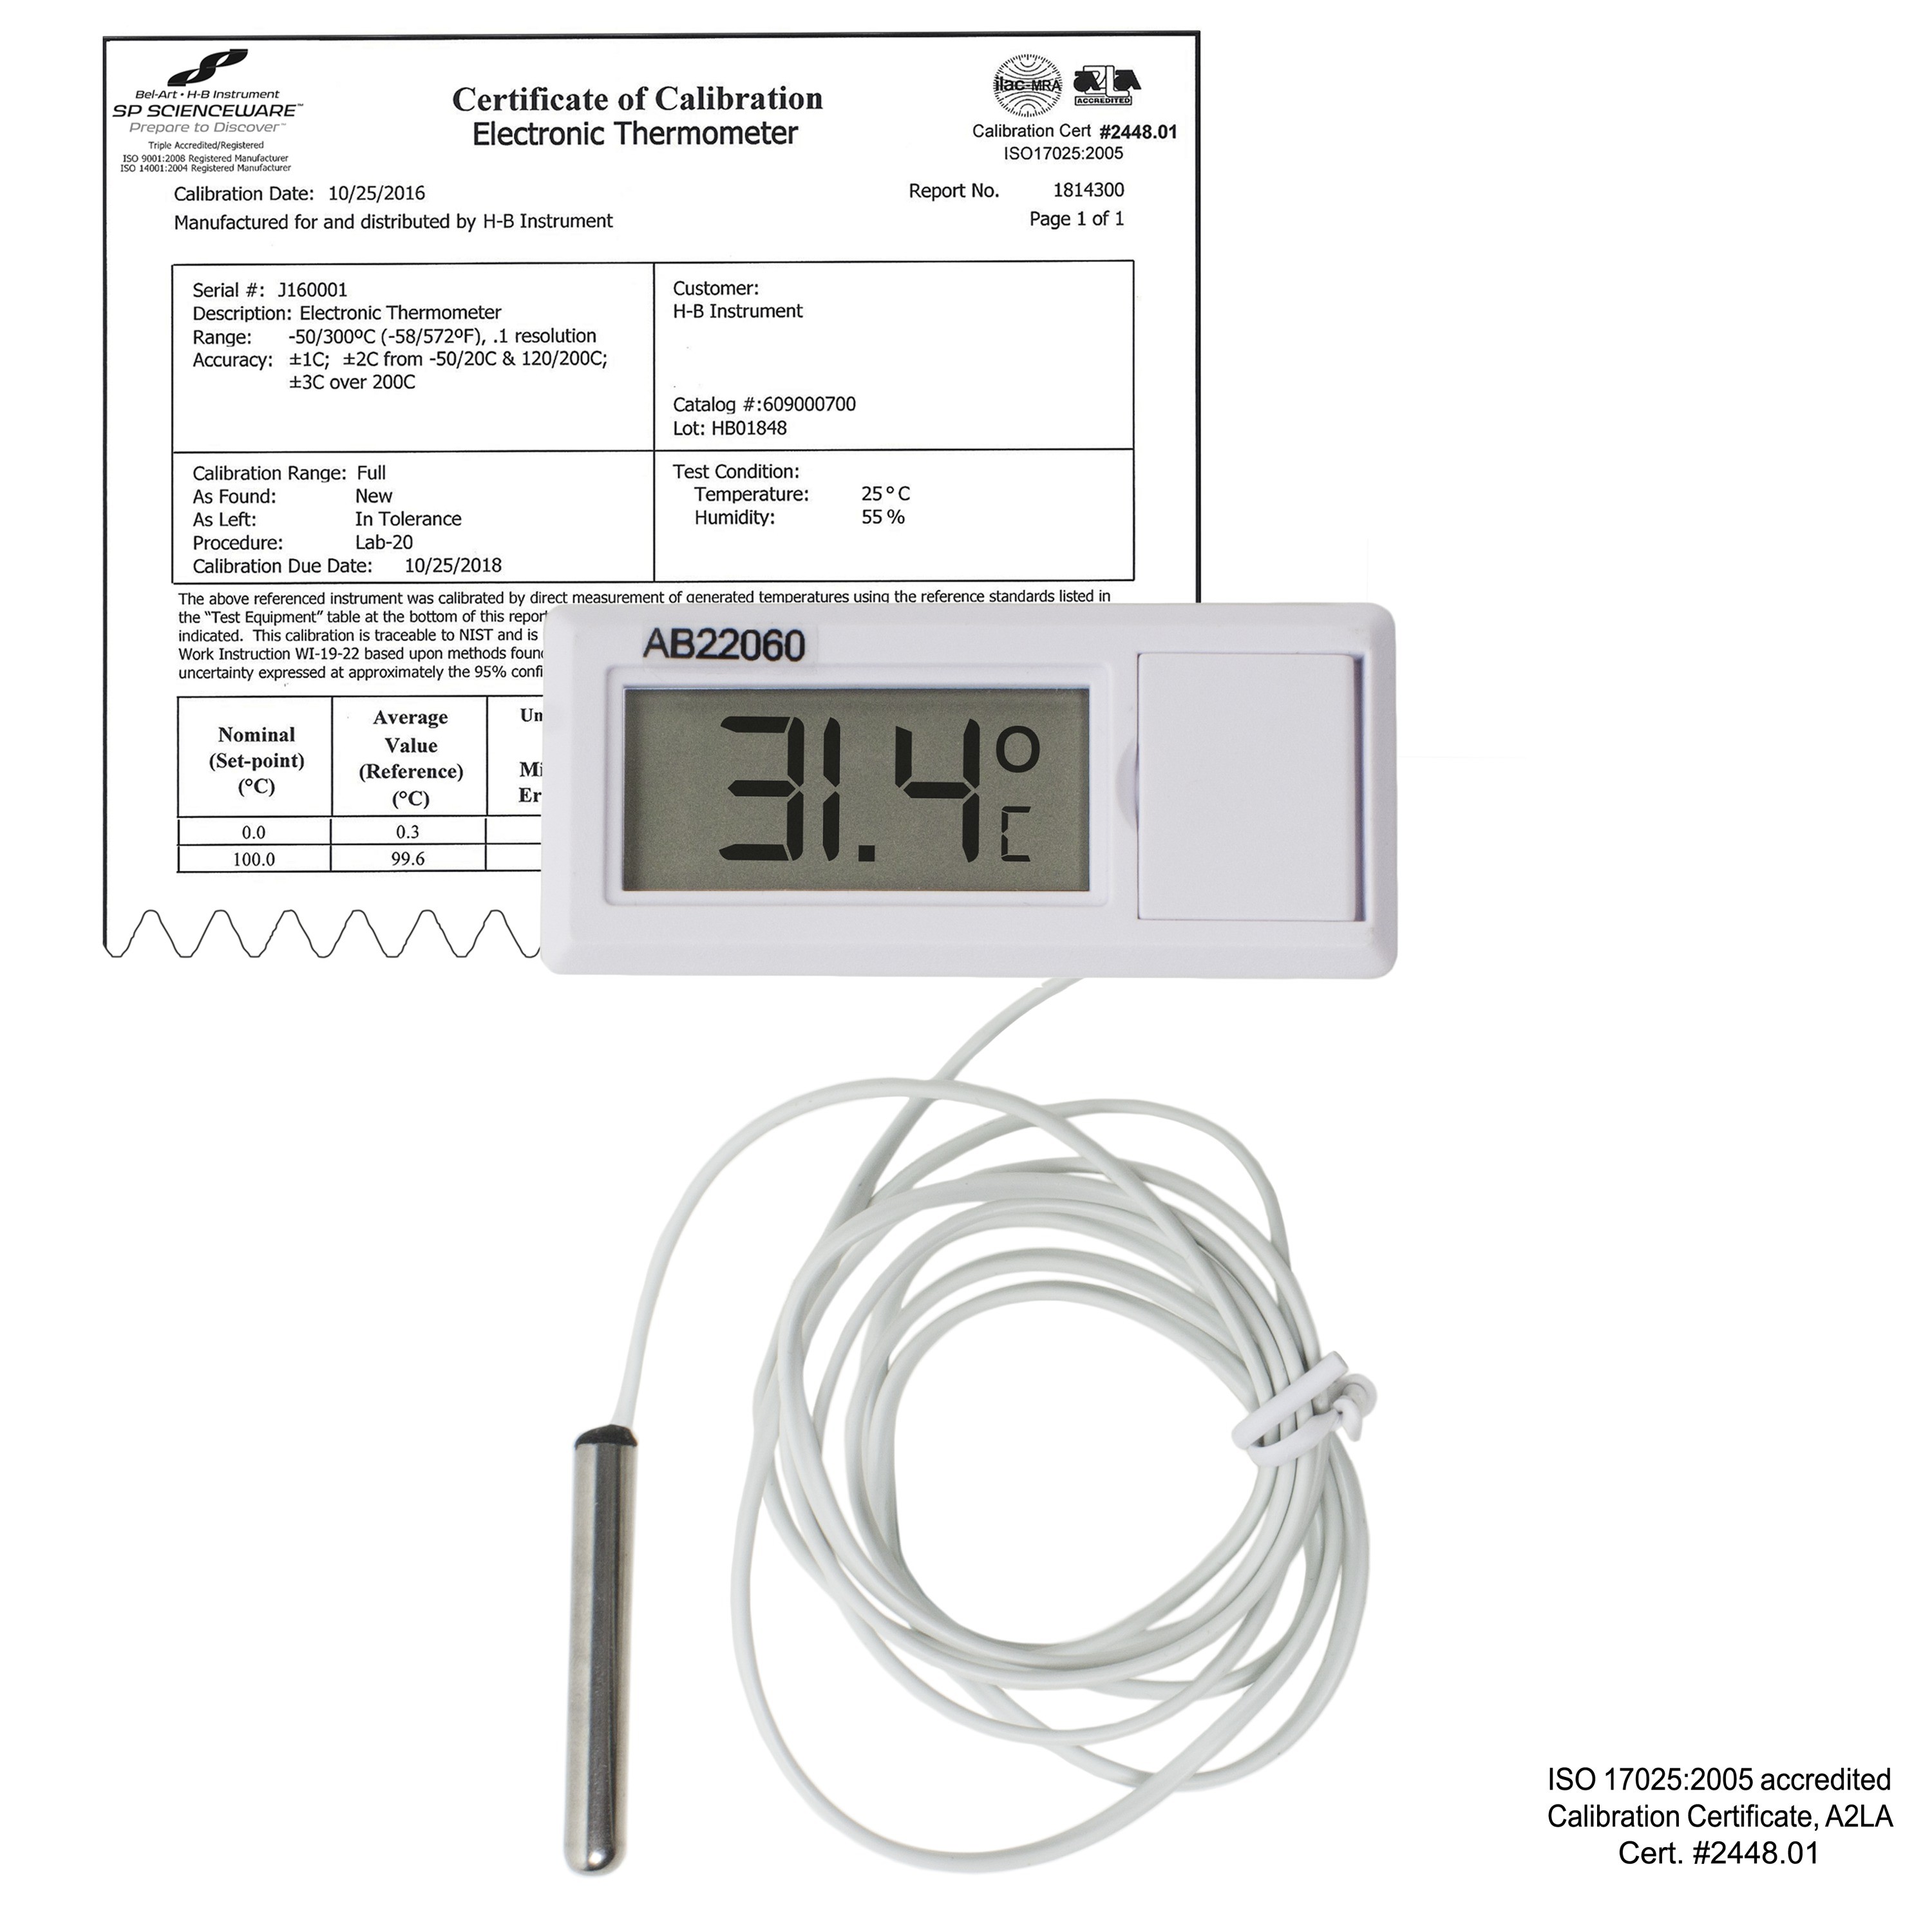 H-B Instrument Durac Hot Water/Refrigerant Line Thermometers:Thermometers